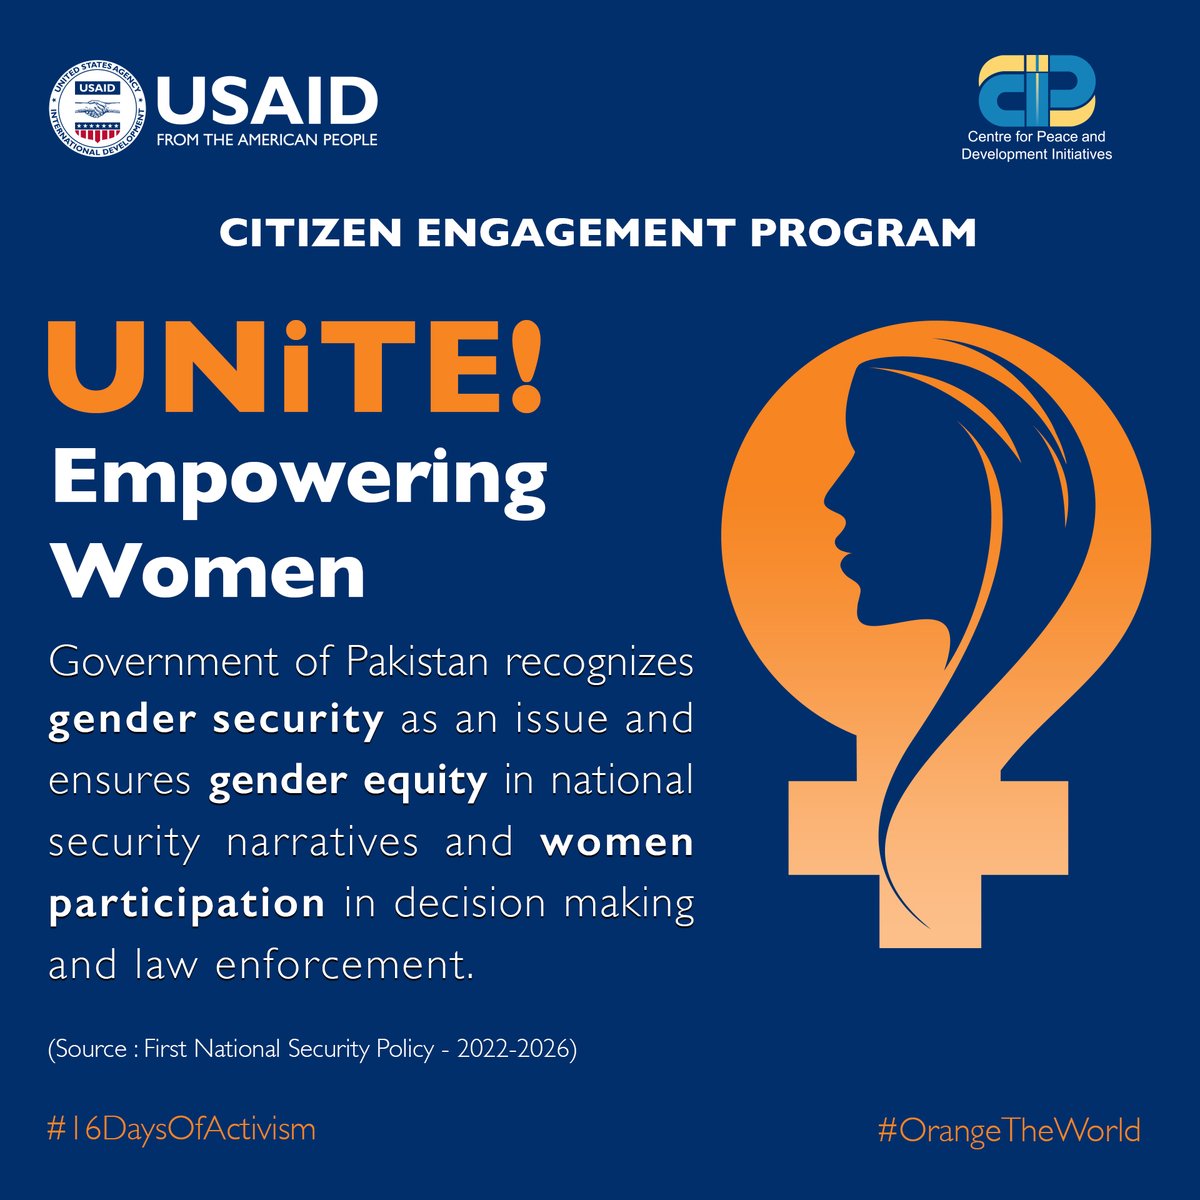 A significant stride in Pakistan’s commitment to justice for all! Proudly advancing this case with CPDI’s Citizen Engagement Program!
#USAID4Impact
#Change4Impact #Unite4Impact #Act4Impact